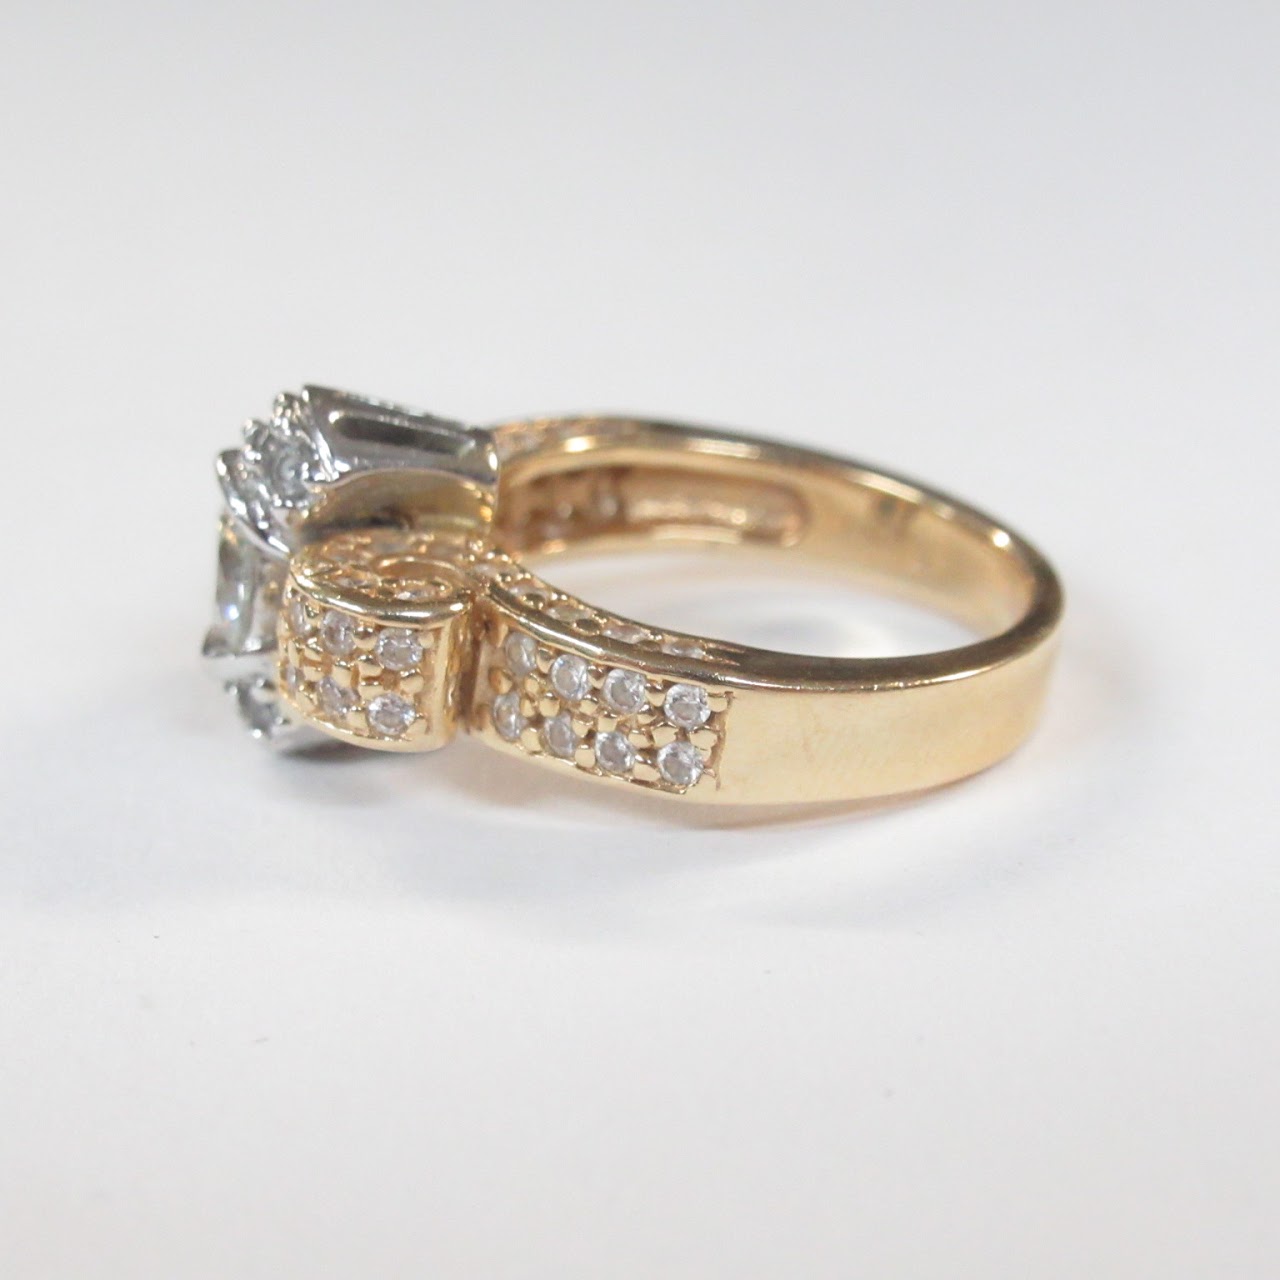 14K Gold, White Gold, and Clear Stone Ring